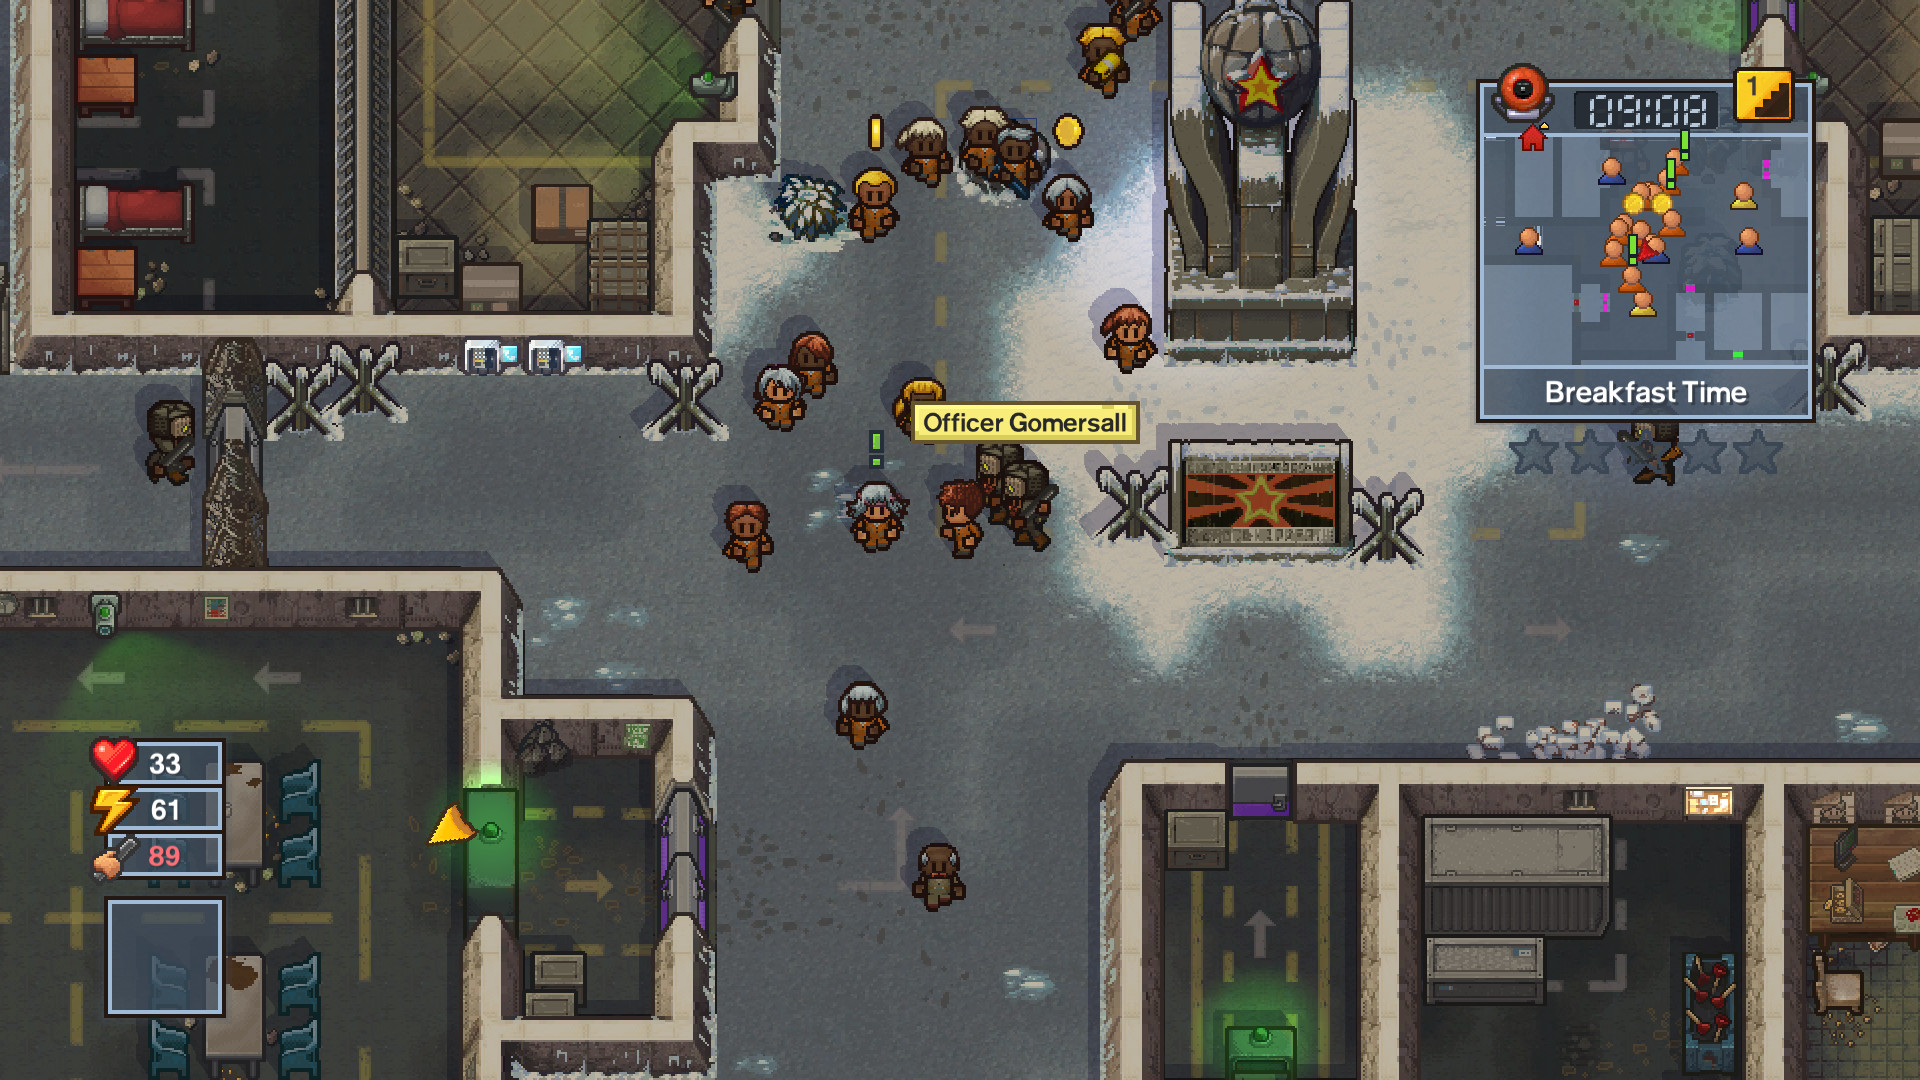 The Escapists is now free on the Epic Games Store